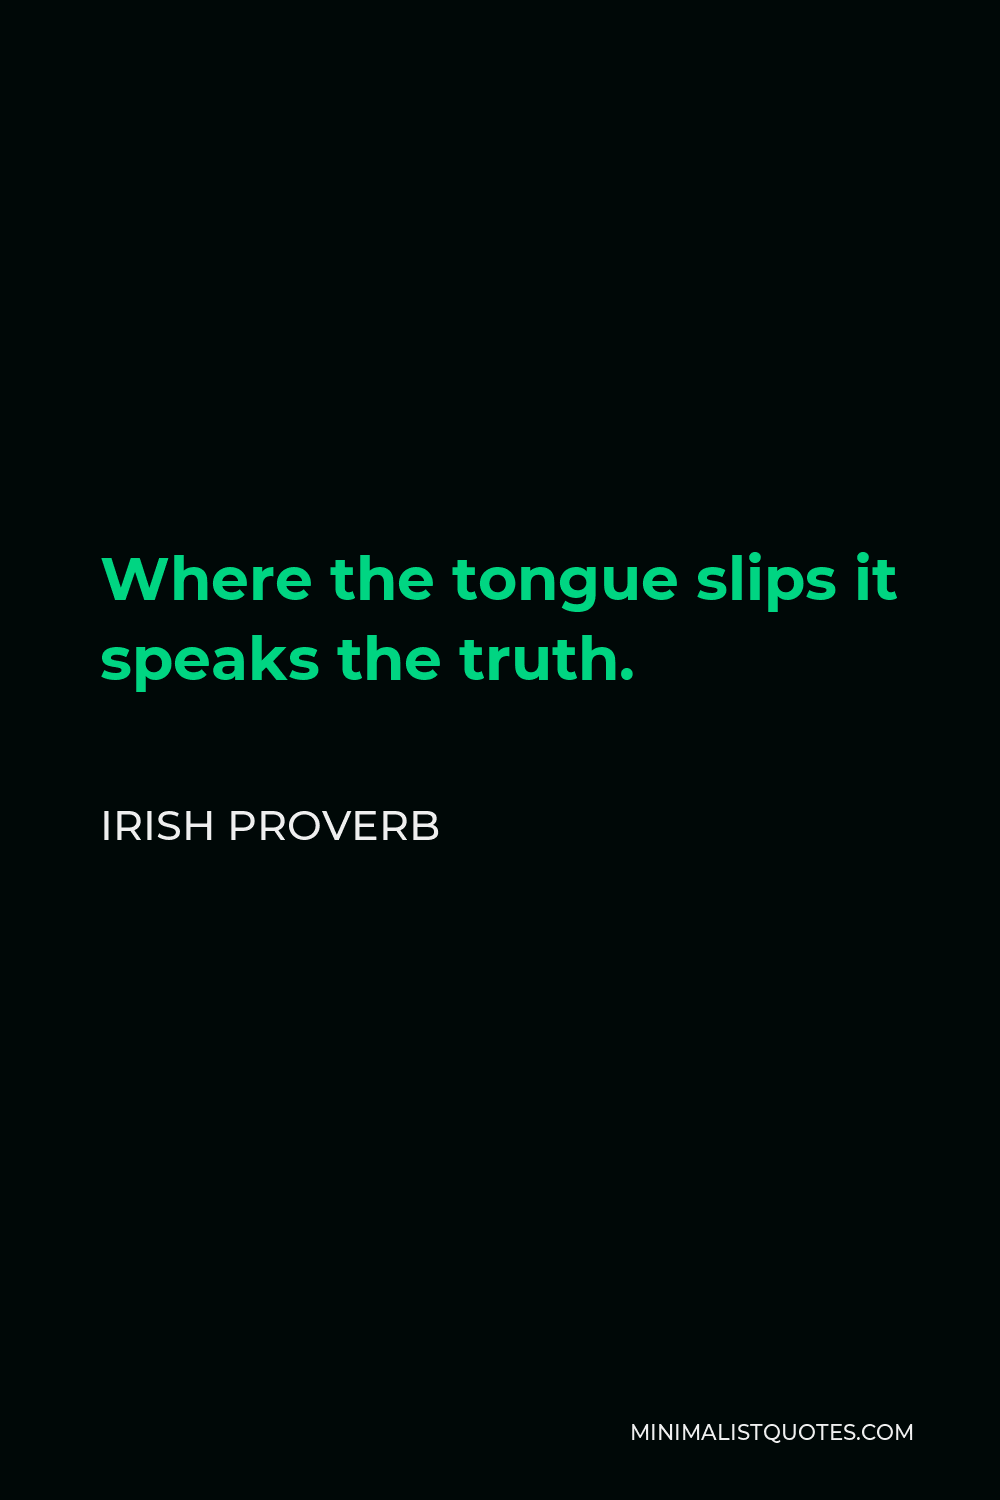 Irish Proverb Quote - Where the tongue slips it speaks the truth.